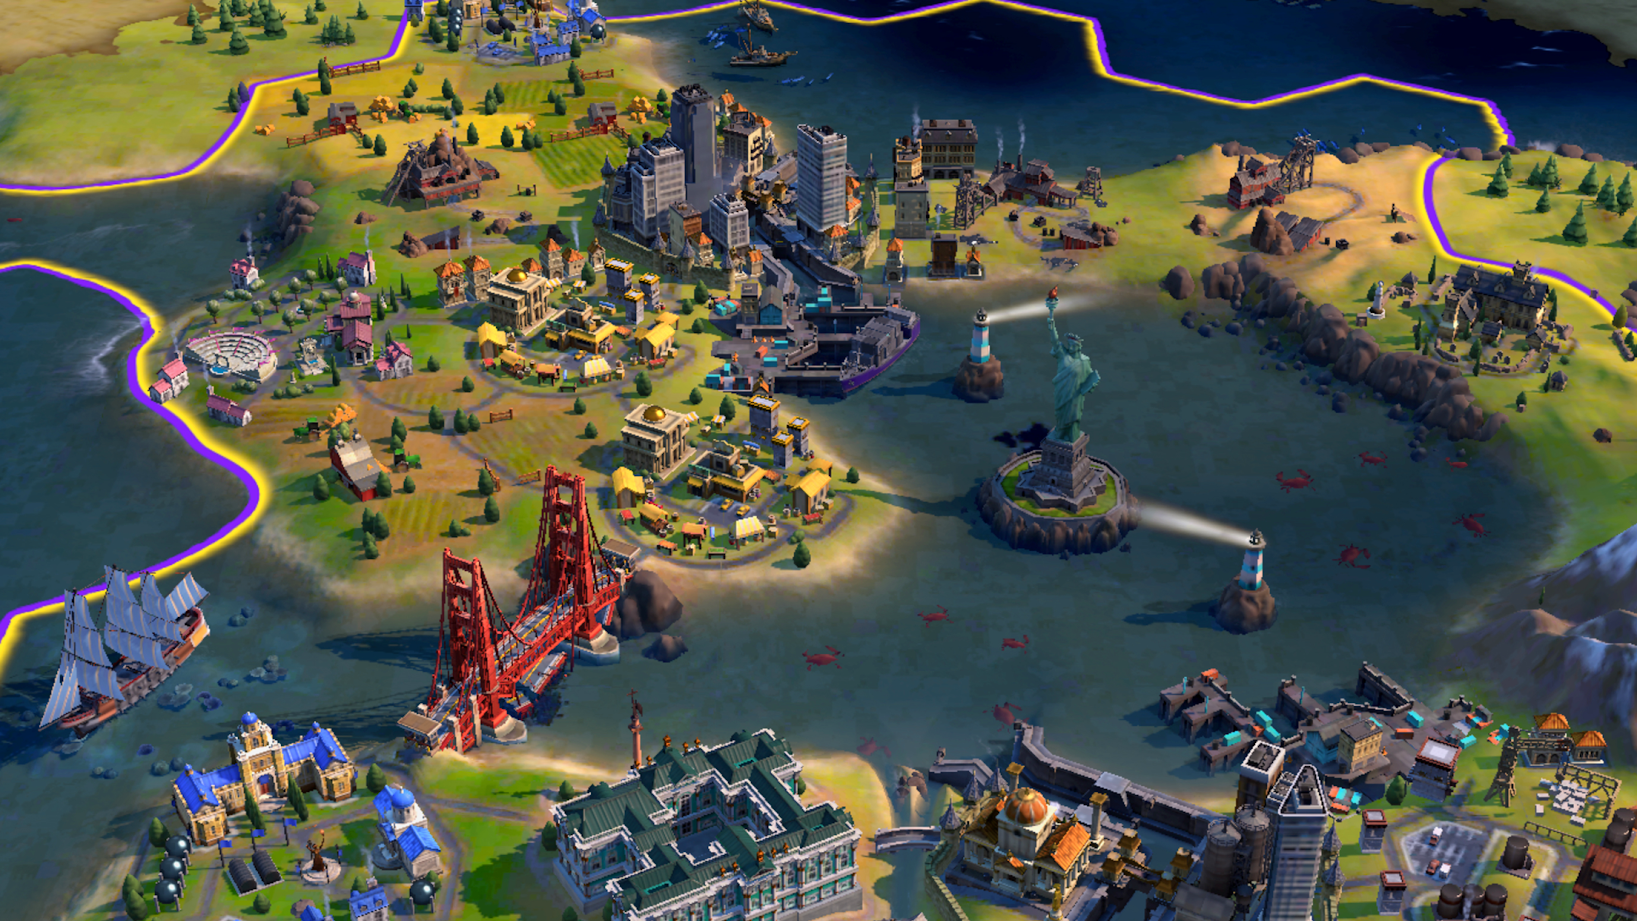 Roundup of the best Civilization VI games